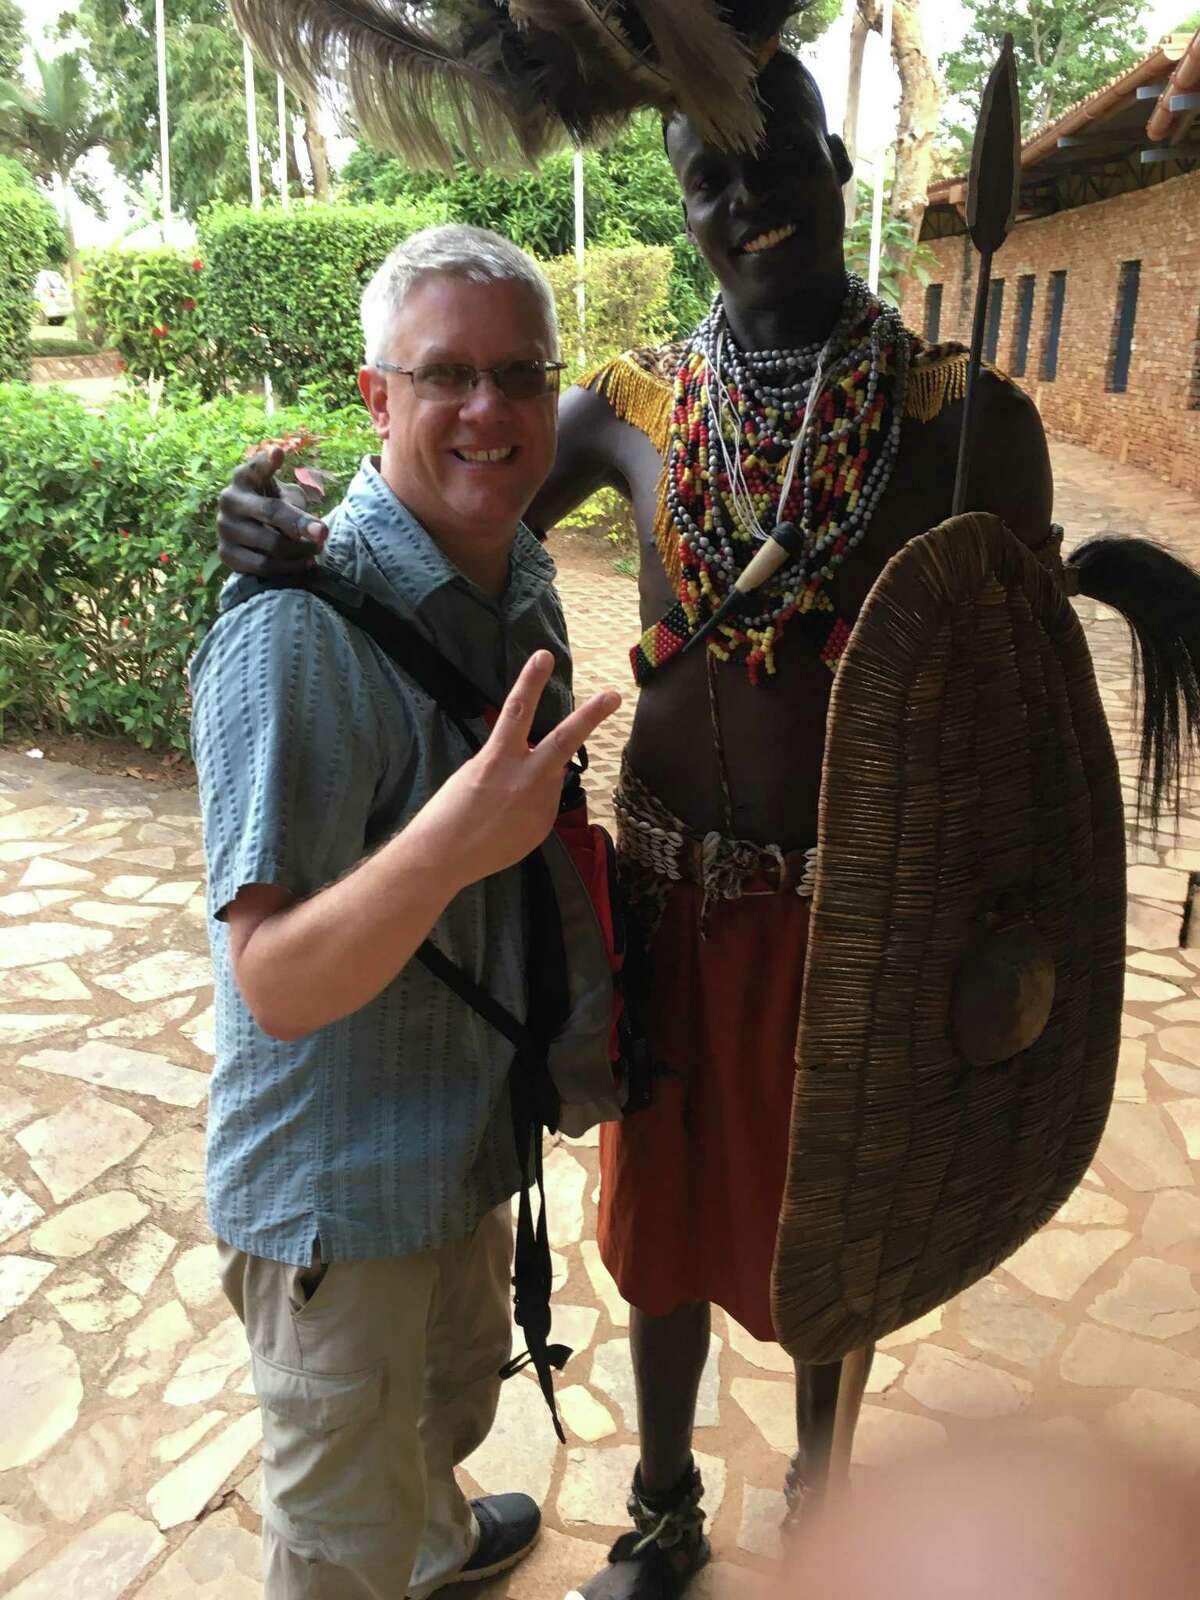 William Davis, a technology teacher at Rhodes Middle School, is shown in a photo he sent his daughter while traveling in Uganda. It was the last photo she received from her father, who died in an accident in Uganda.